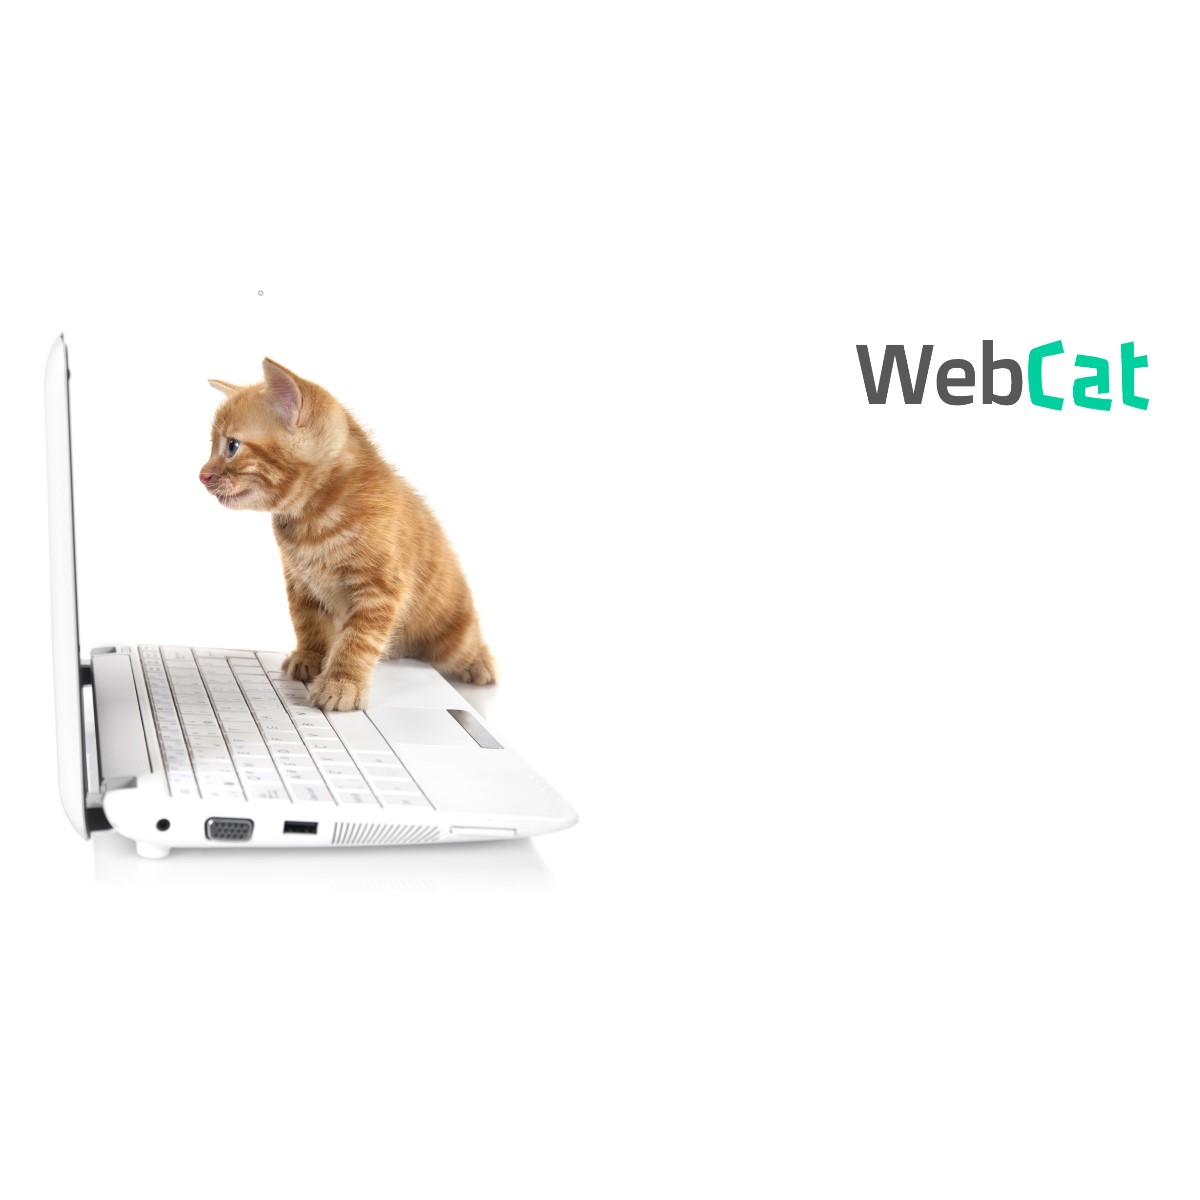 WebCat Adds Shopping Cart and More